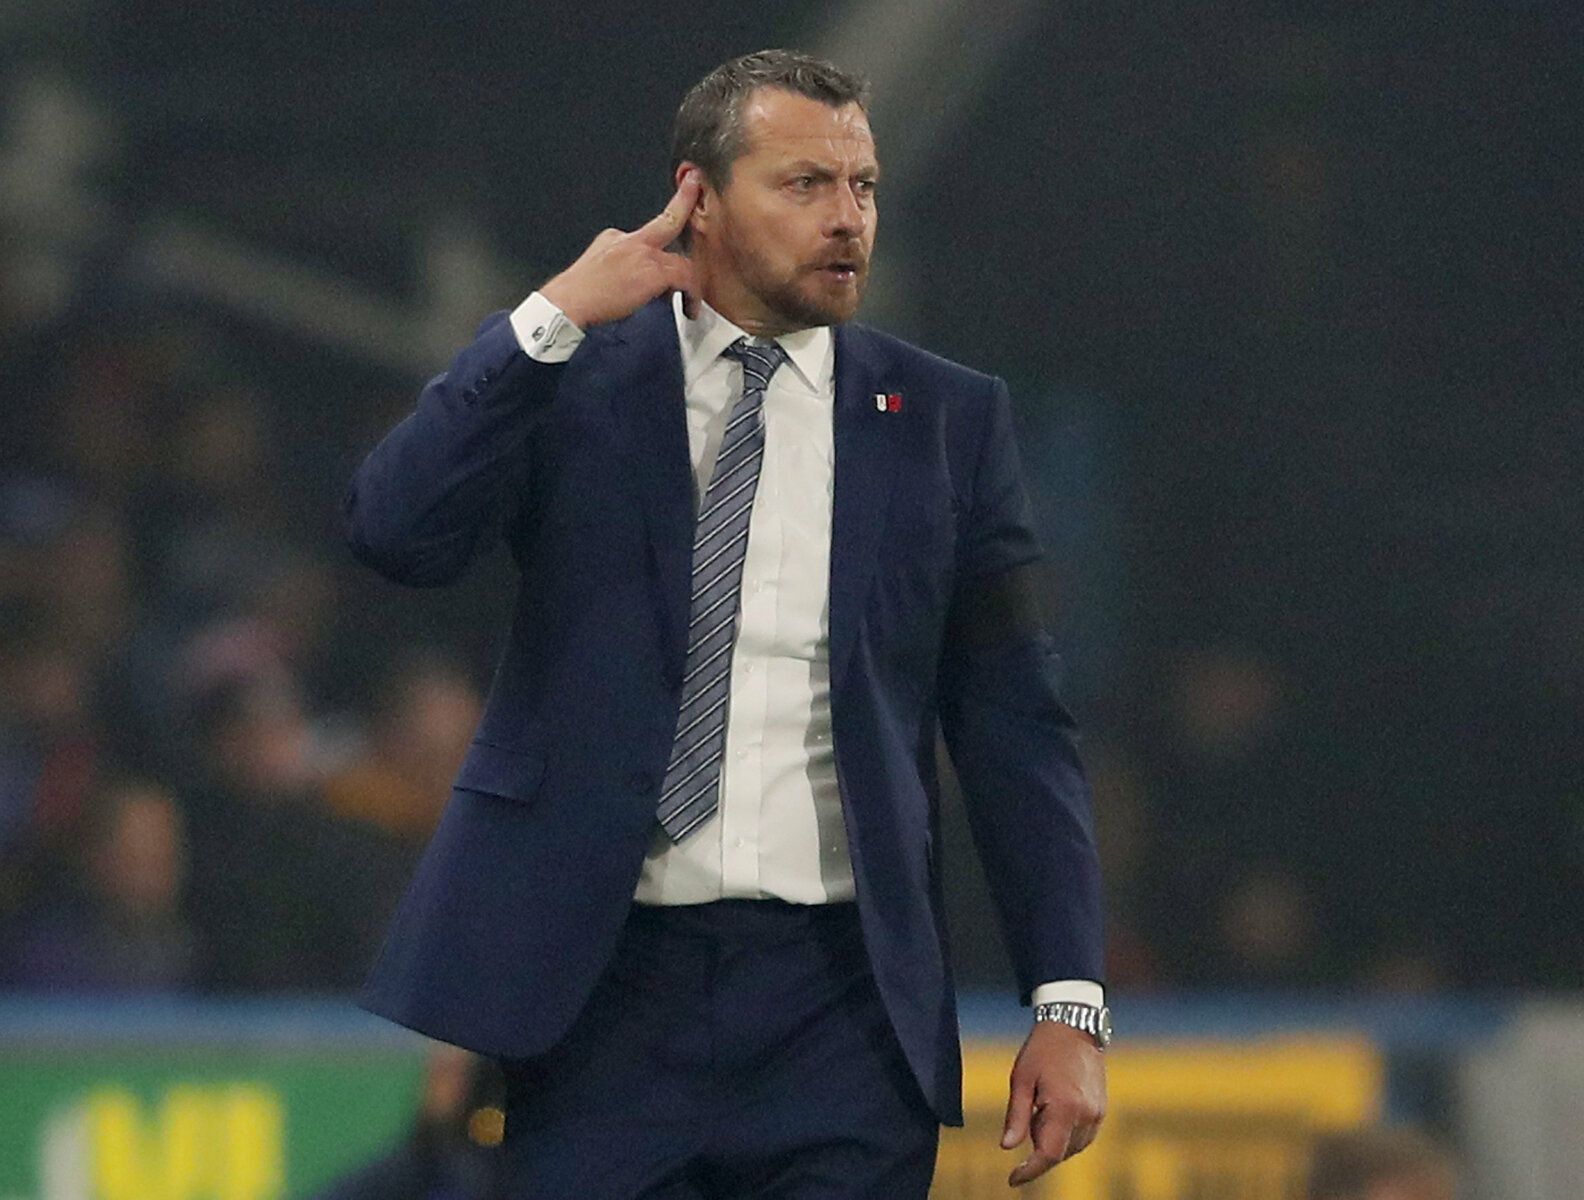 Soccer Football - Premier League - Huddersfield Town v Fulham - John Smith's Stadium, Huddersfield, Britain - November 5, 2018   Fulham manager Slavisa Jokanovic during the match    Action Images via Reuters/Lee Smith    EDITORIAL USE ONLY. No use with unauthorized audio, video, data, fixture lists, club/league logos or 